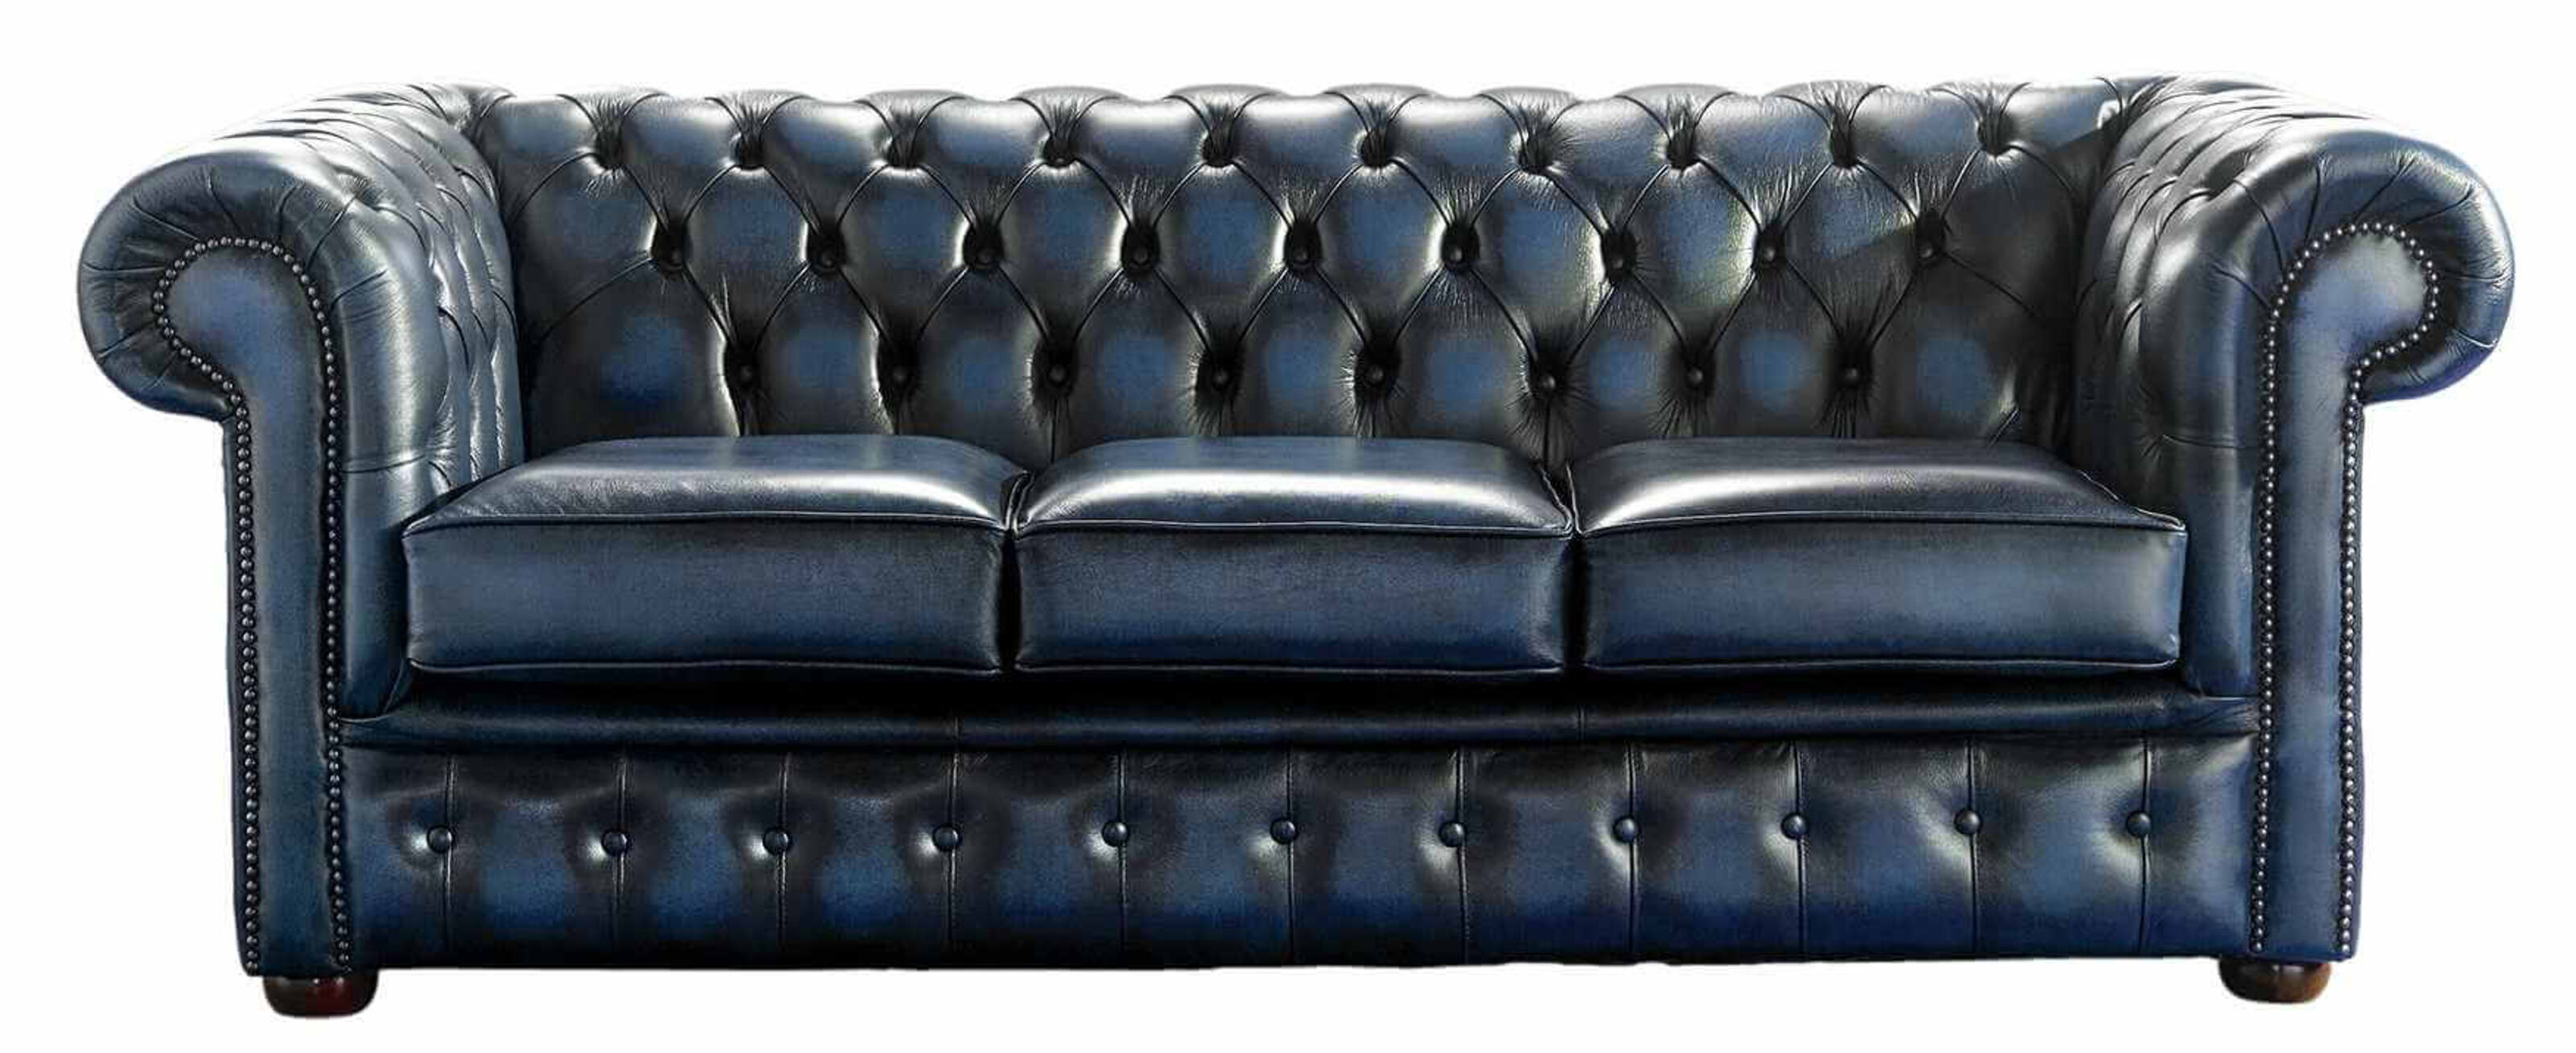 Chesterfield Furniture Sets the Standard for Timeless Elegance  %Post Title